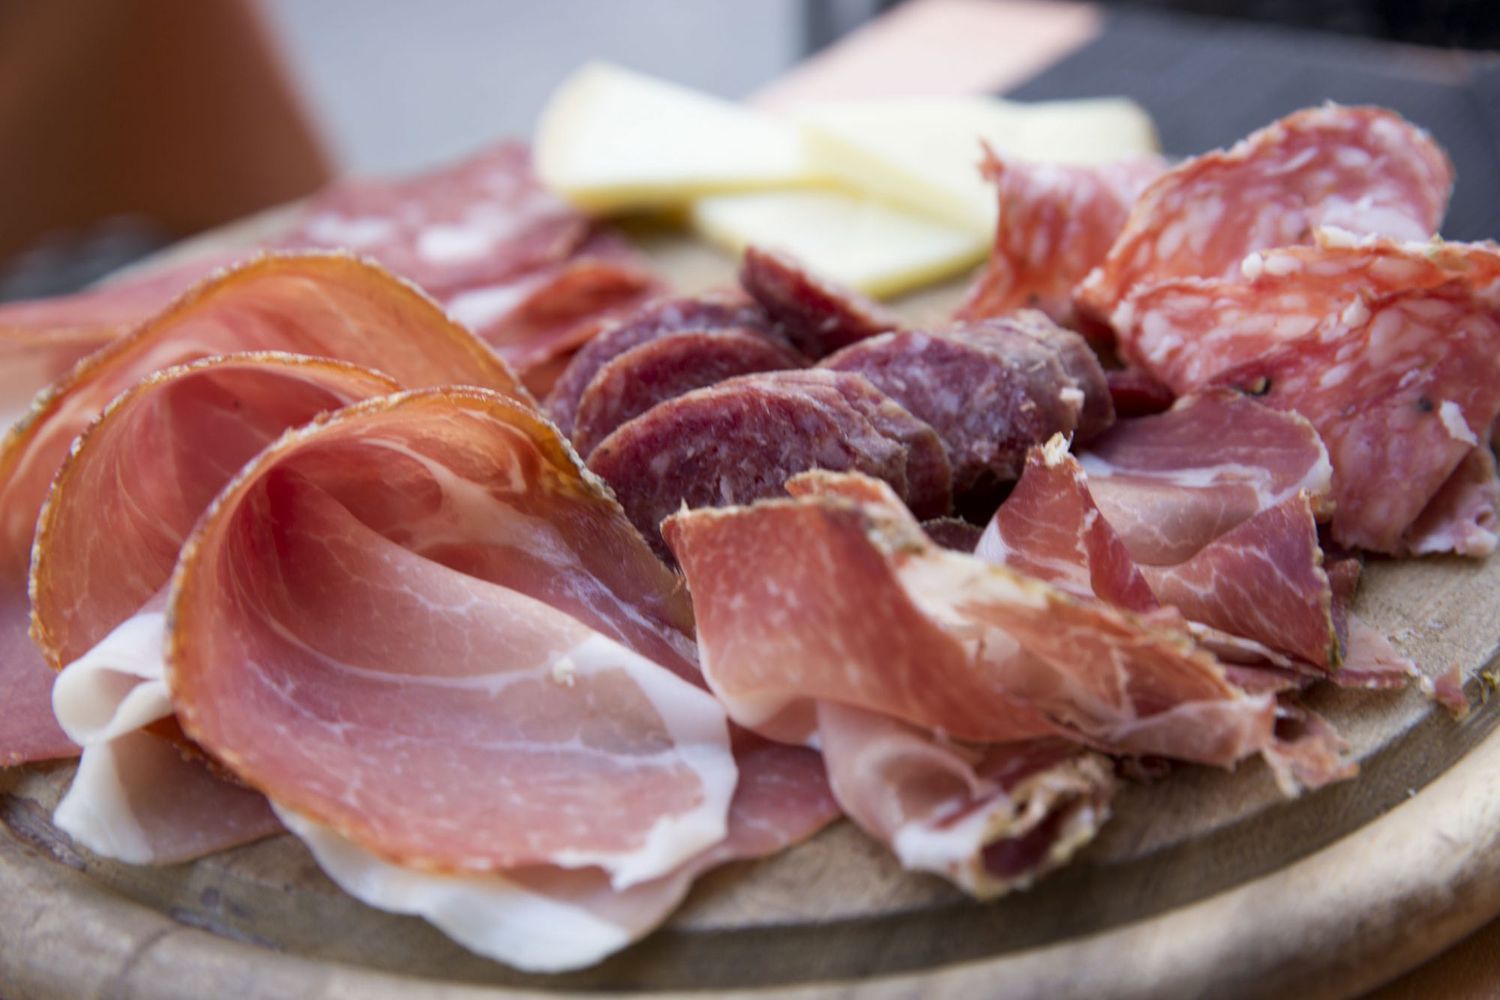 Cured Meats and Cold Cuts&nbsp;